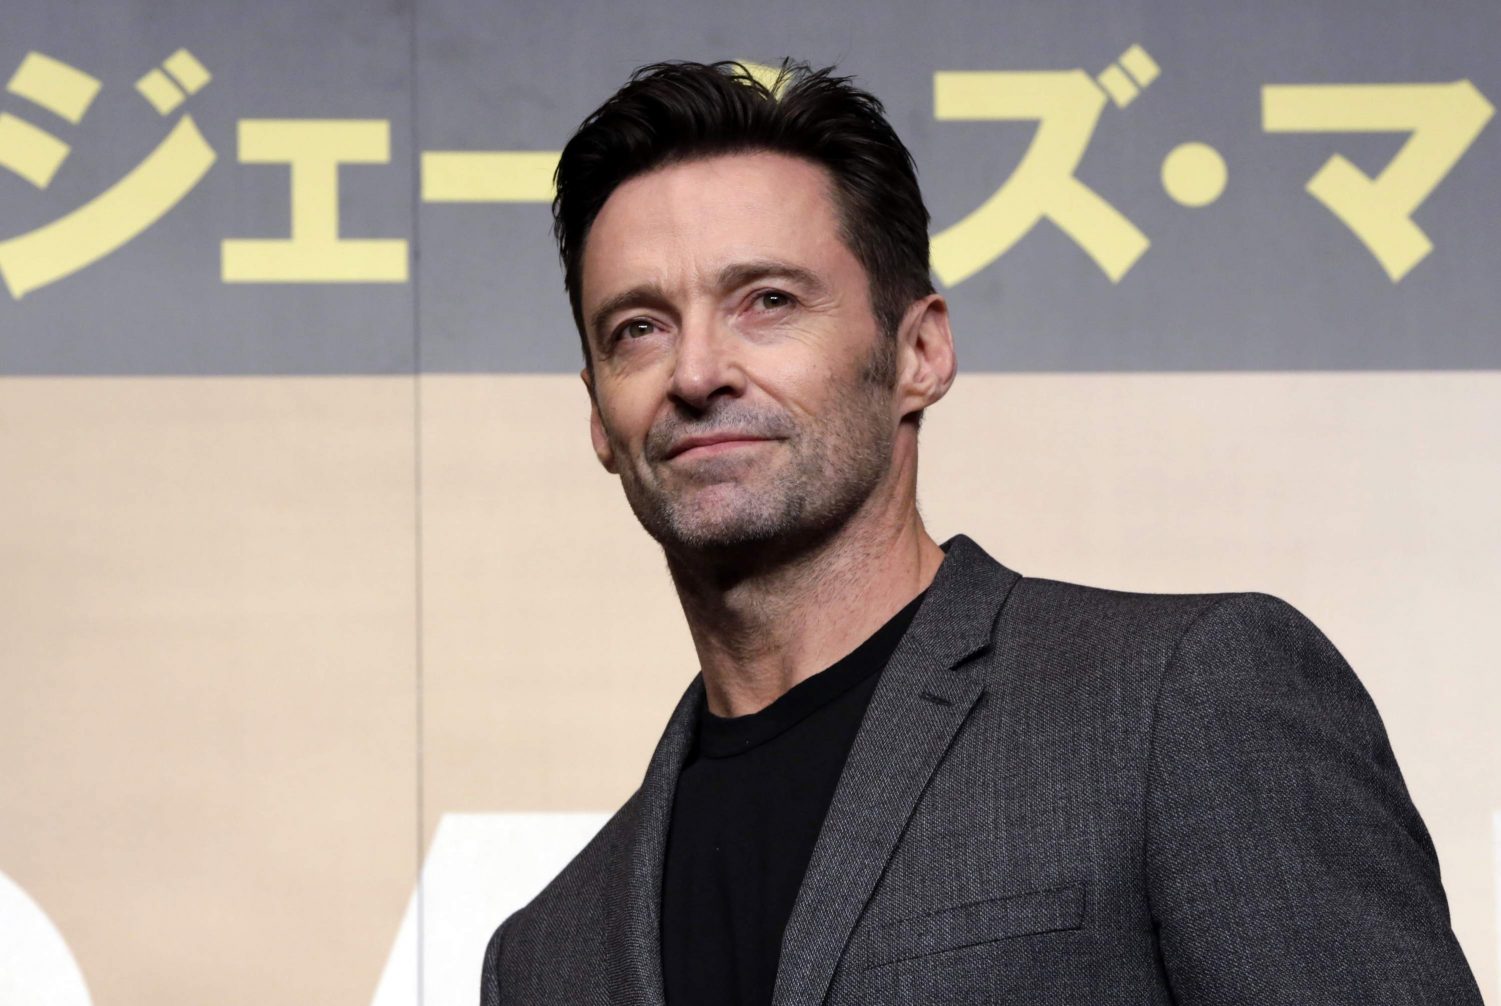 Decide If These Male Celebs Are Attractive to Find Out What Your ❤️ Romantic Personality Is Hugh Jackman